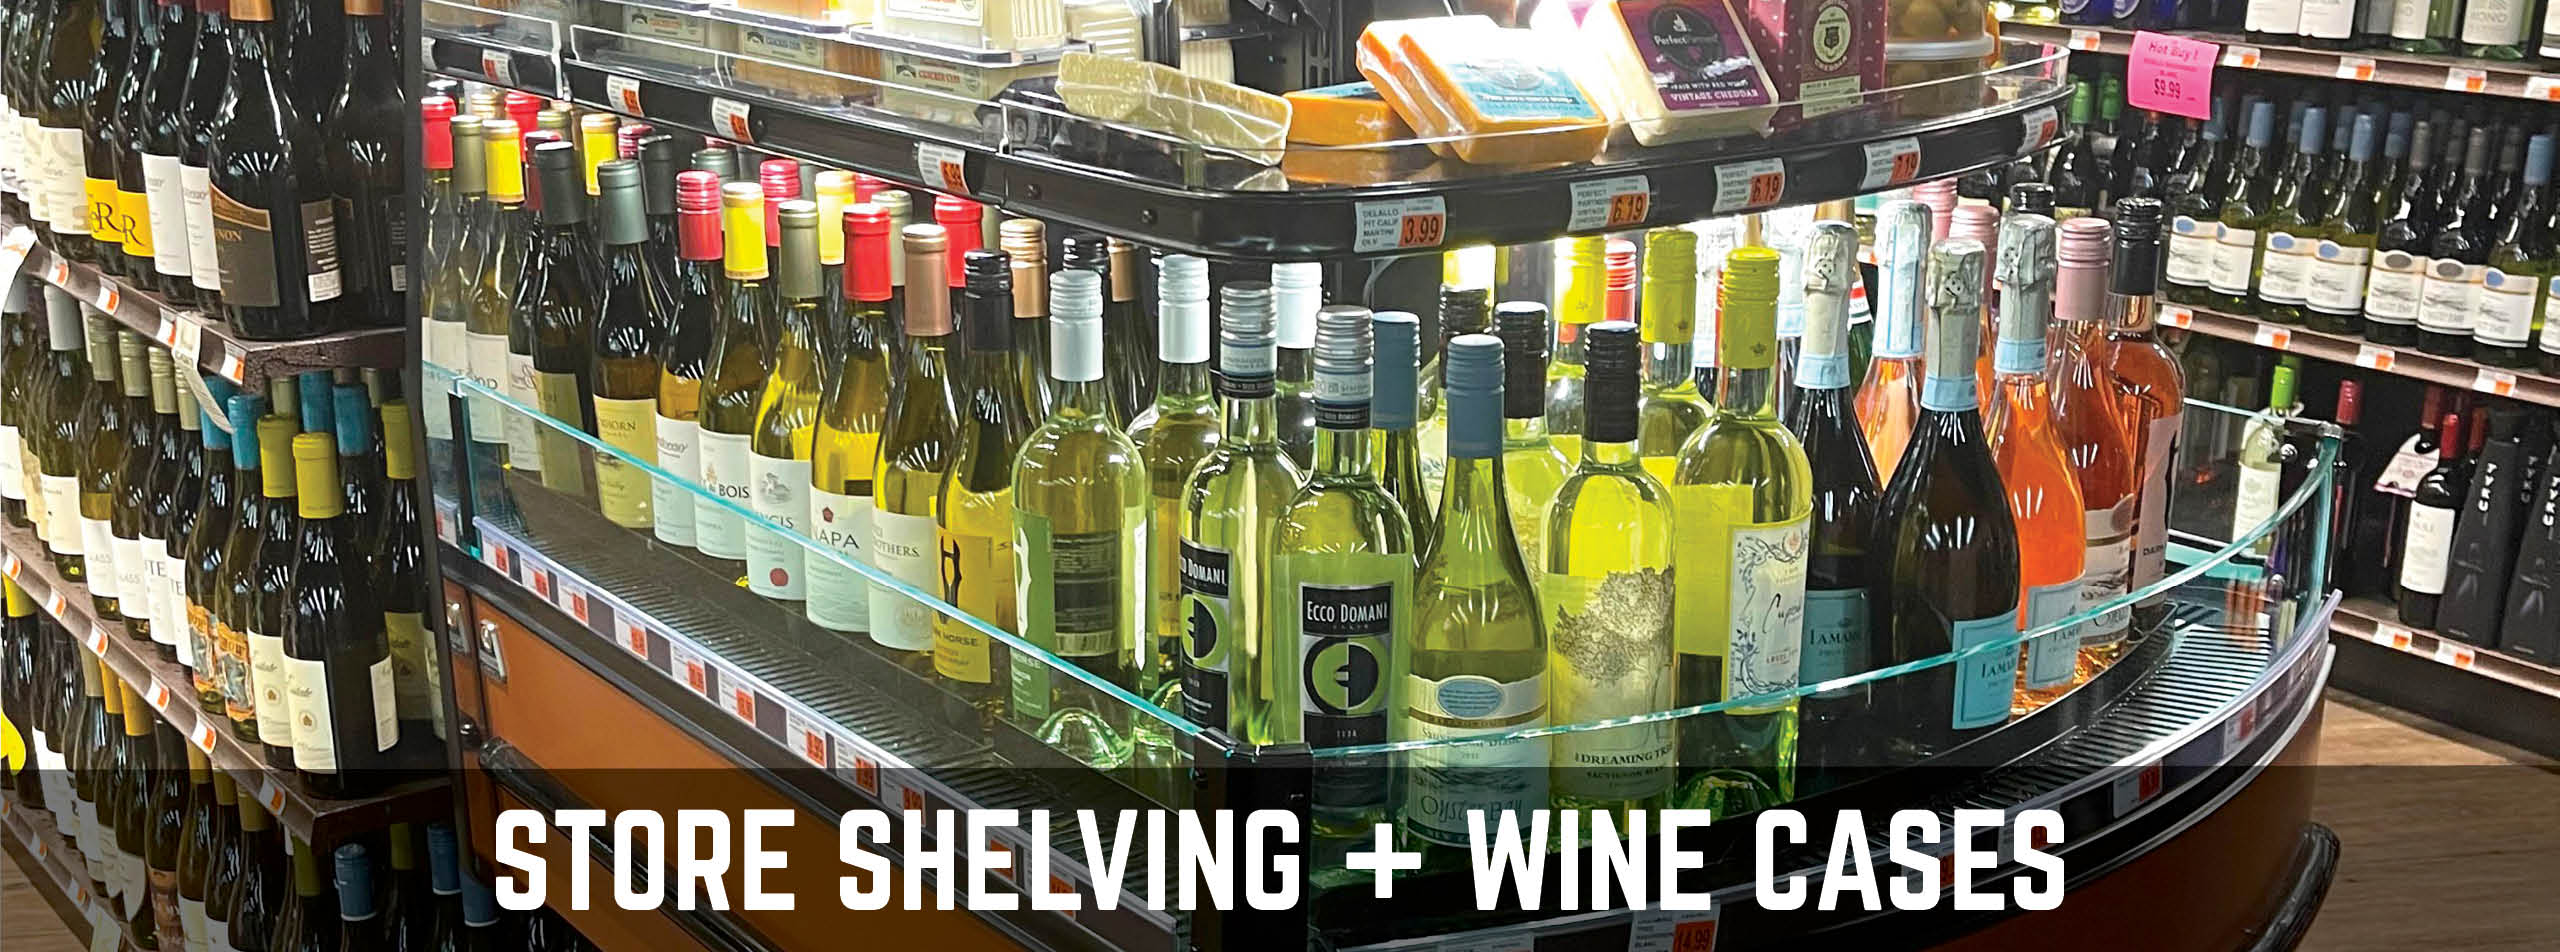 Store Shelving and Wine Cases